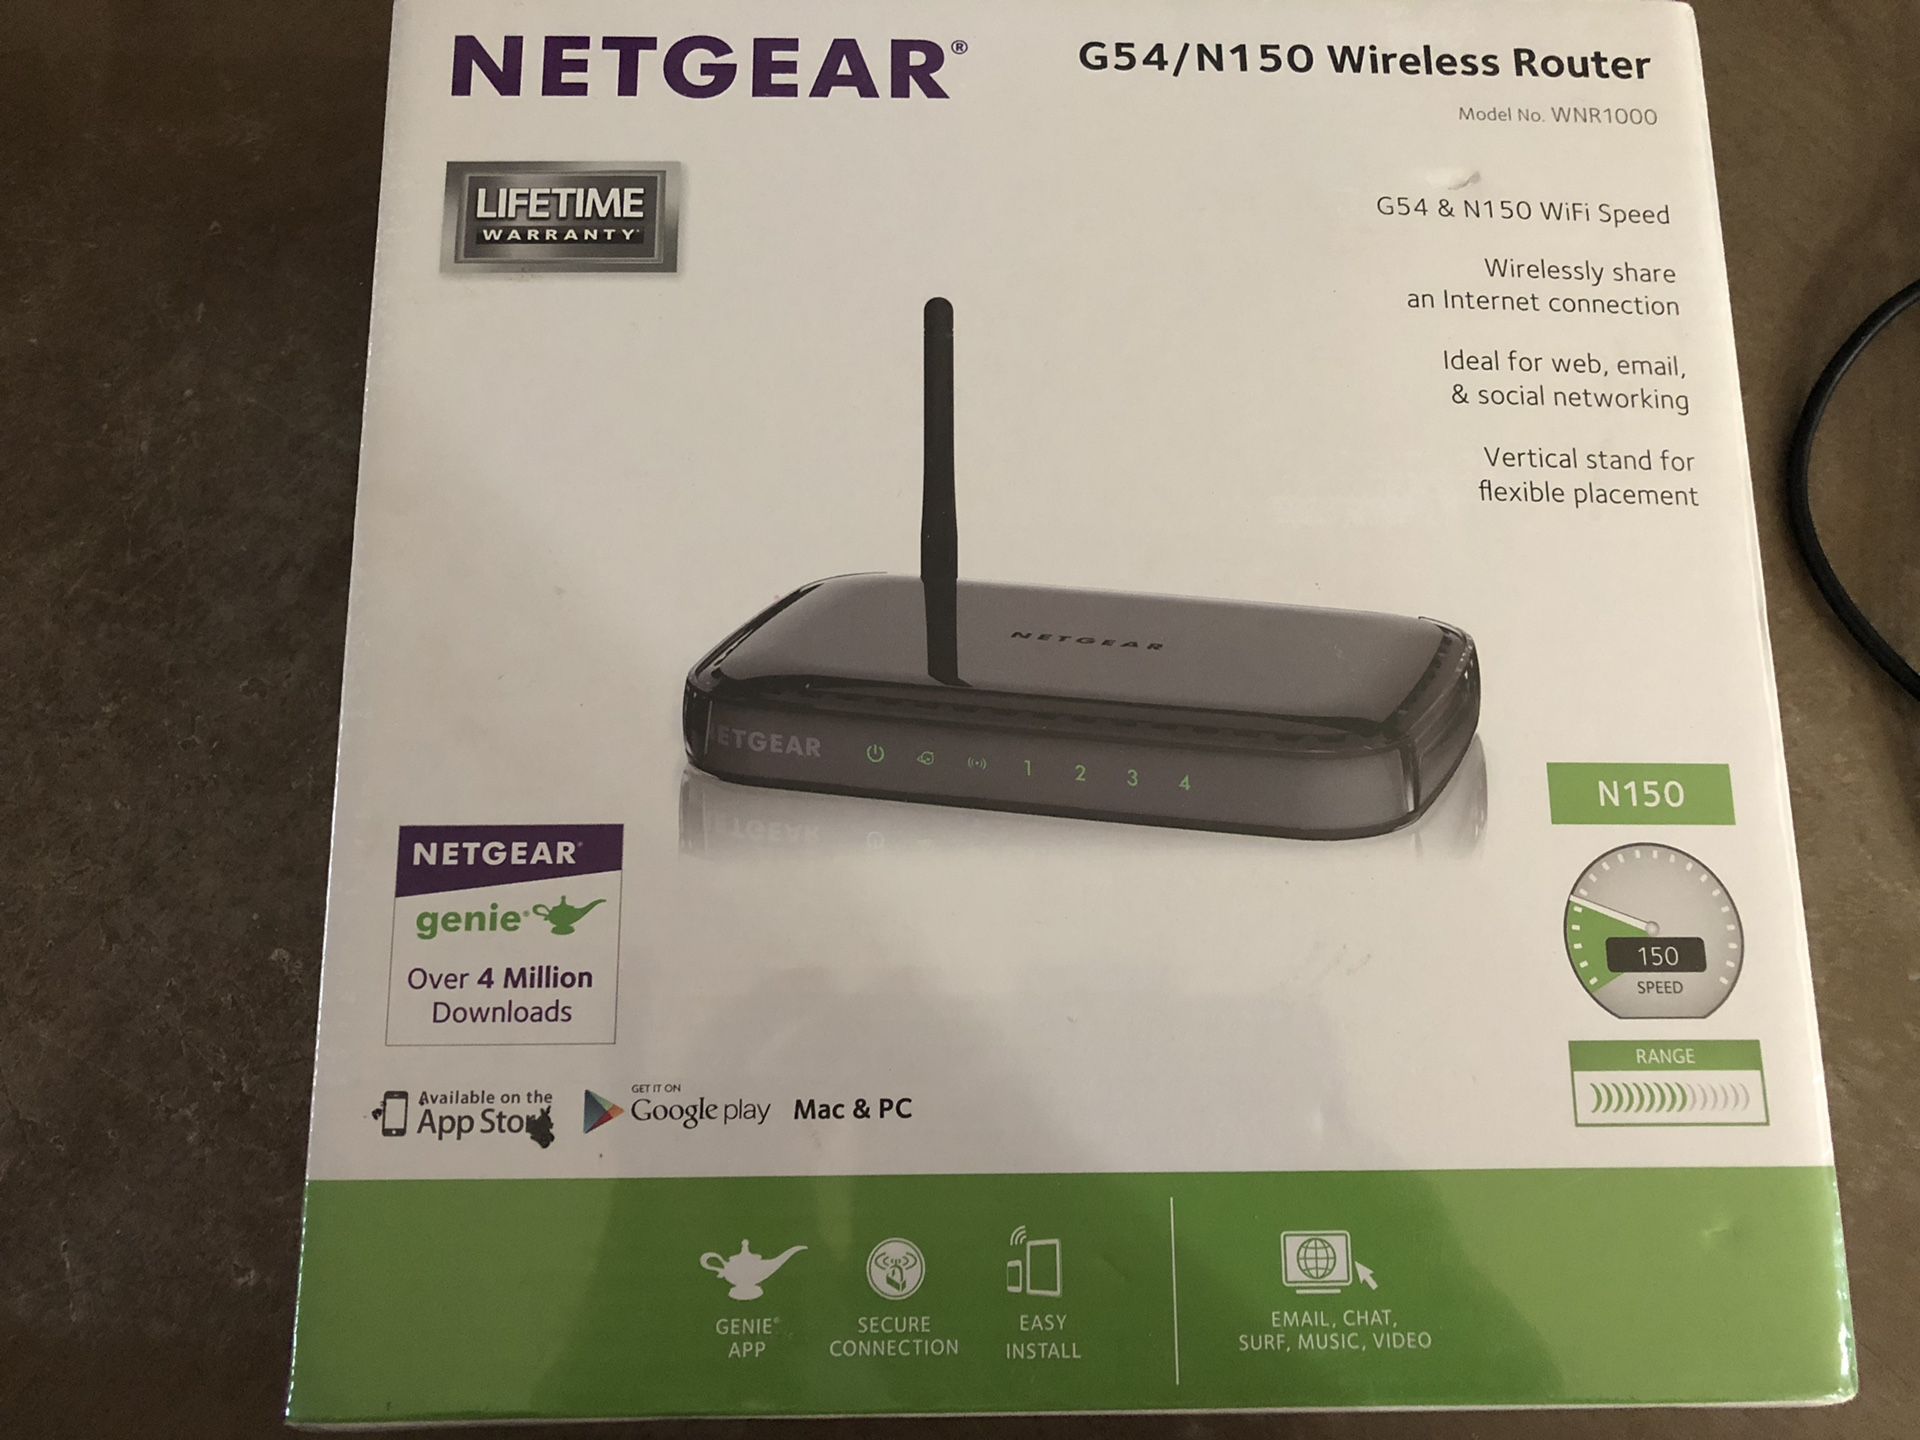 Brand new router